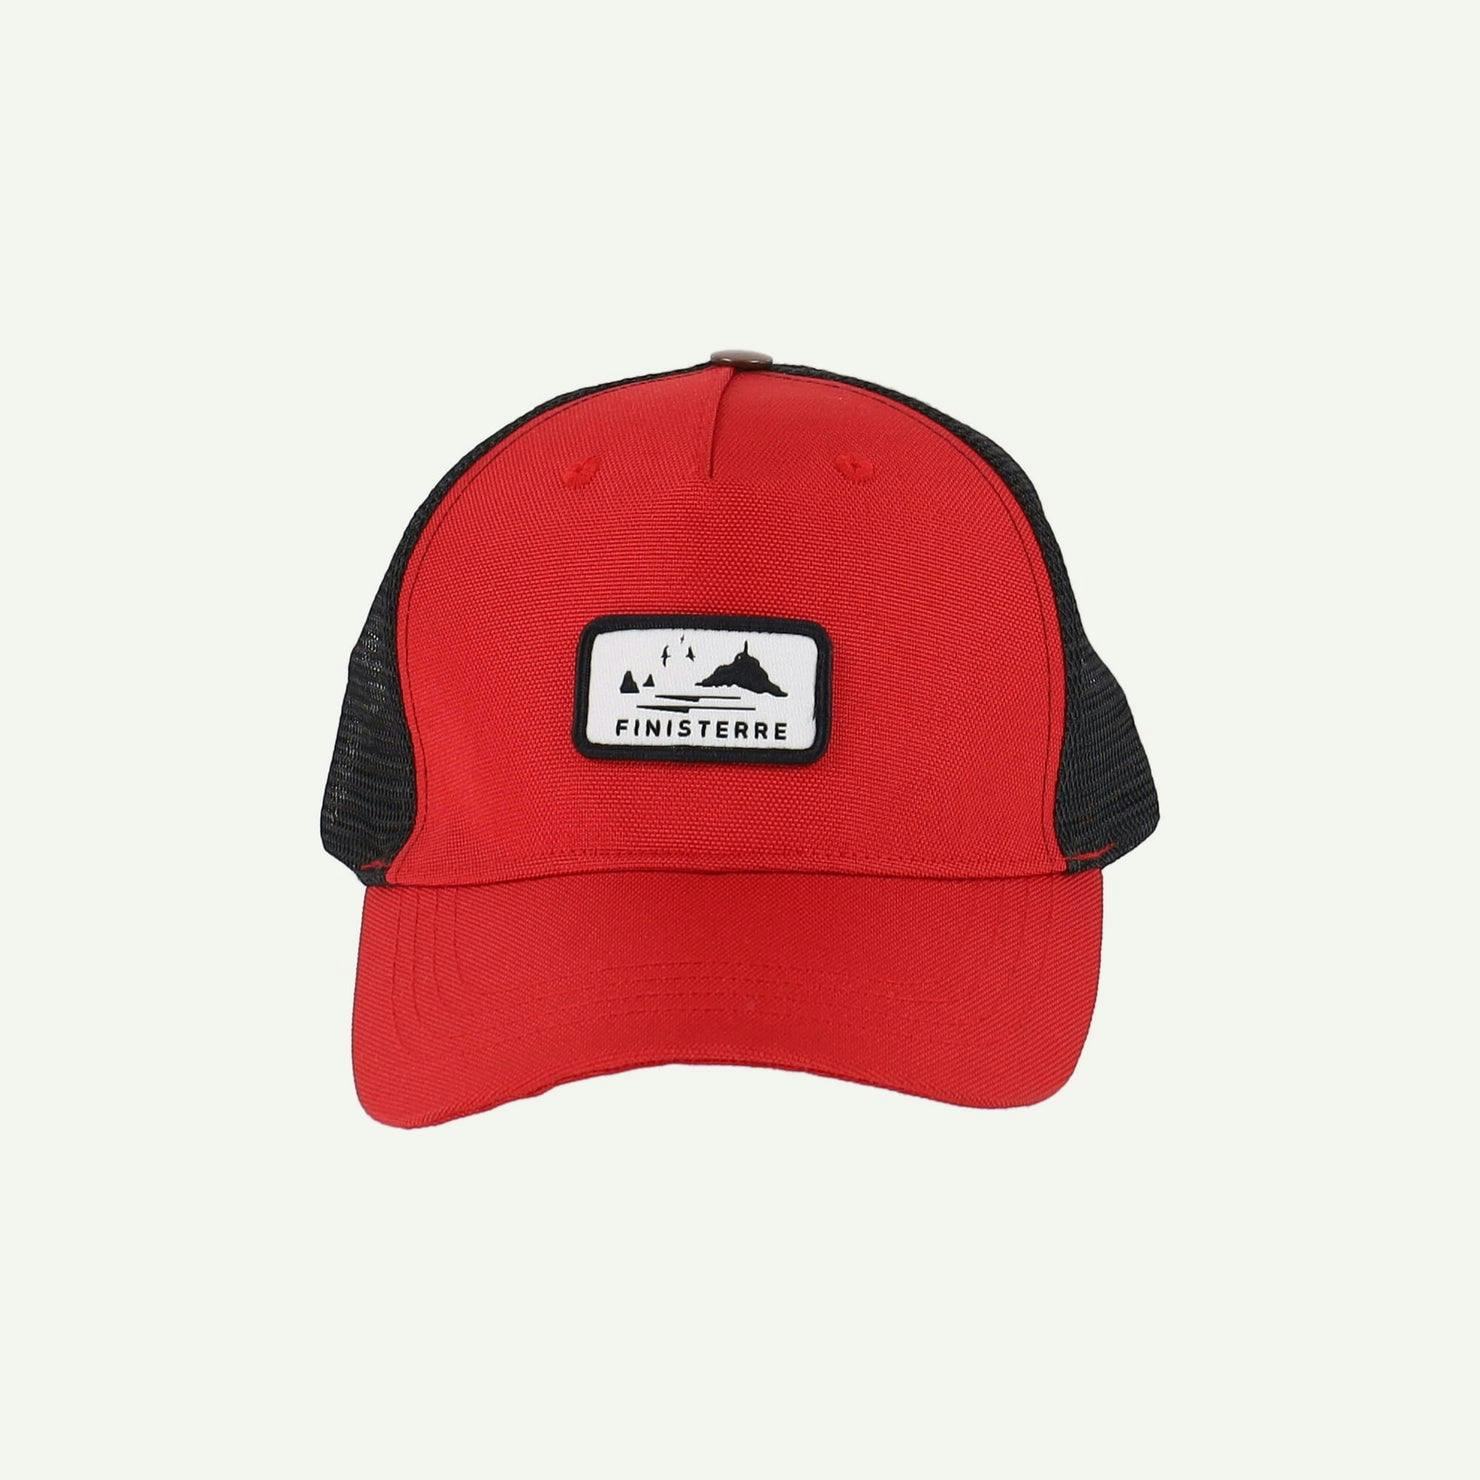 Finisterre As new Red Hat